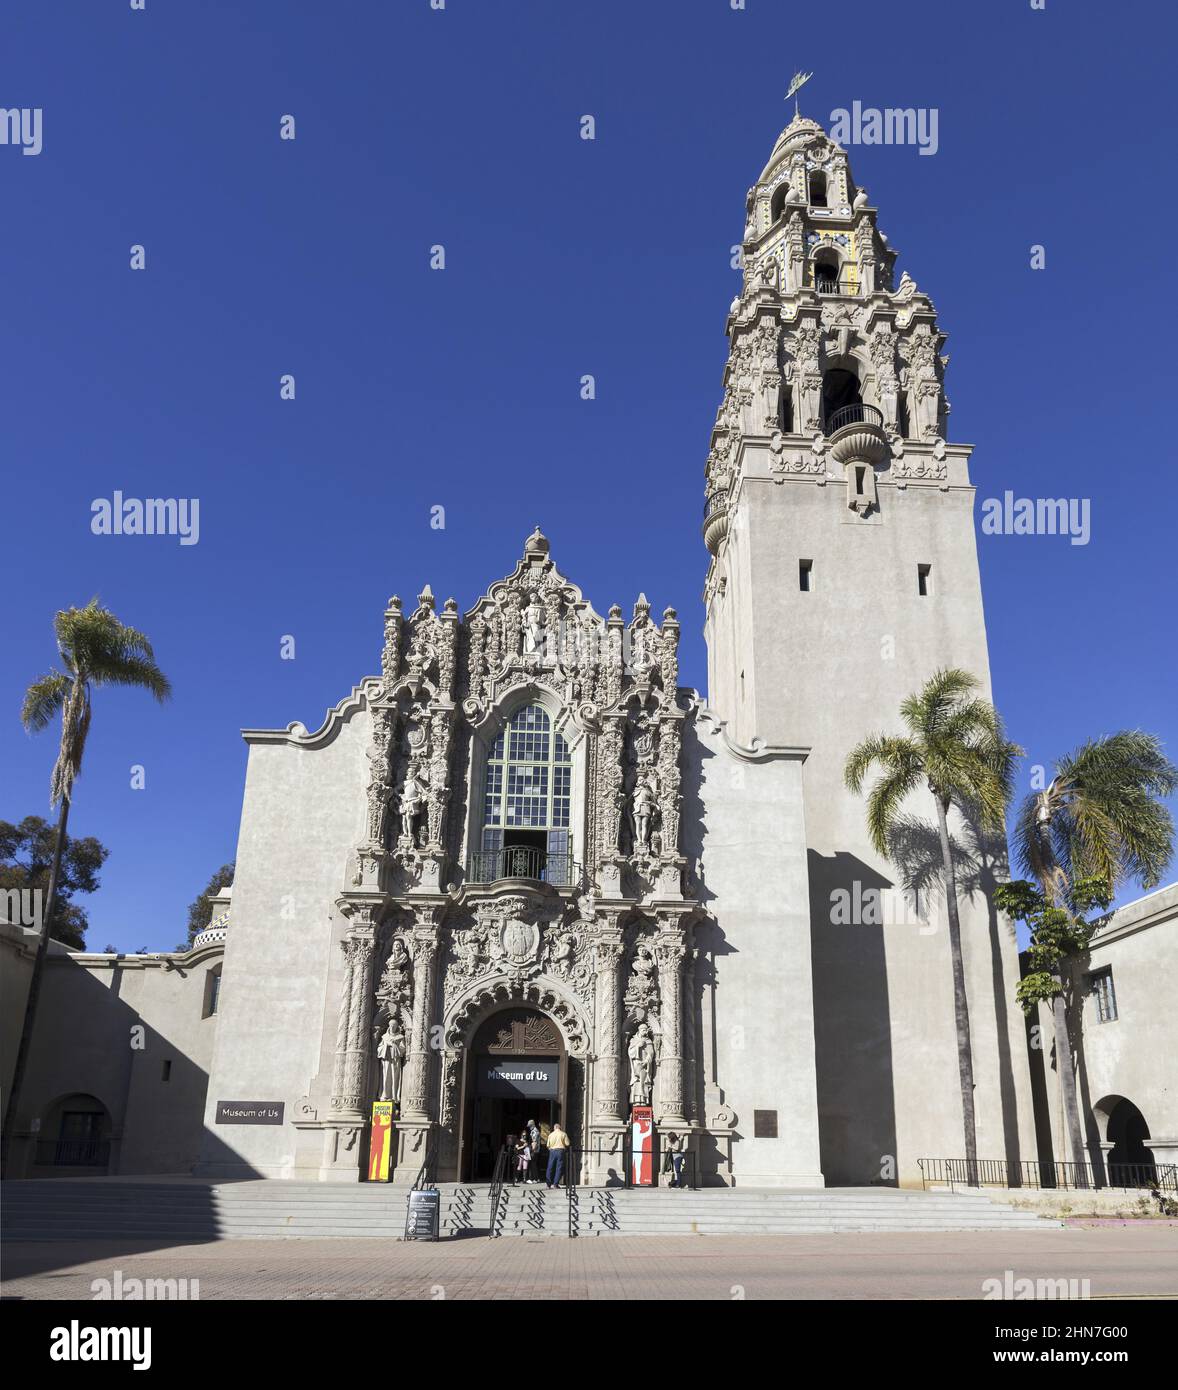 Museum of Us, former Museum of Man, front view facade building exterior vertical portrait view. Balboa Park San Diego California USA Stock Photo